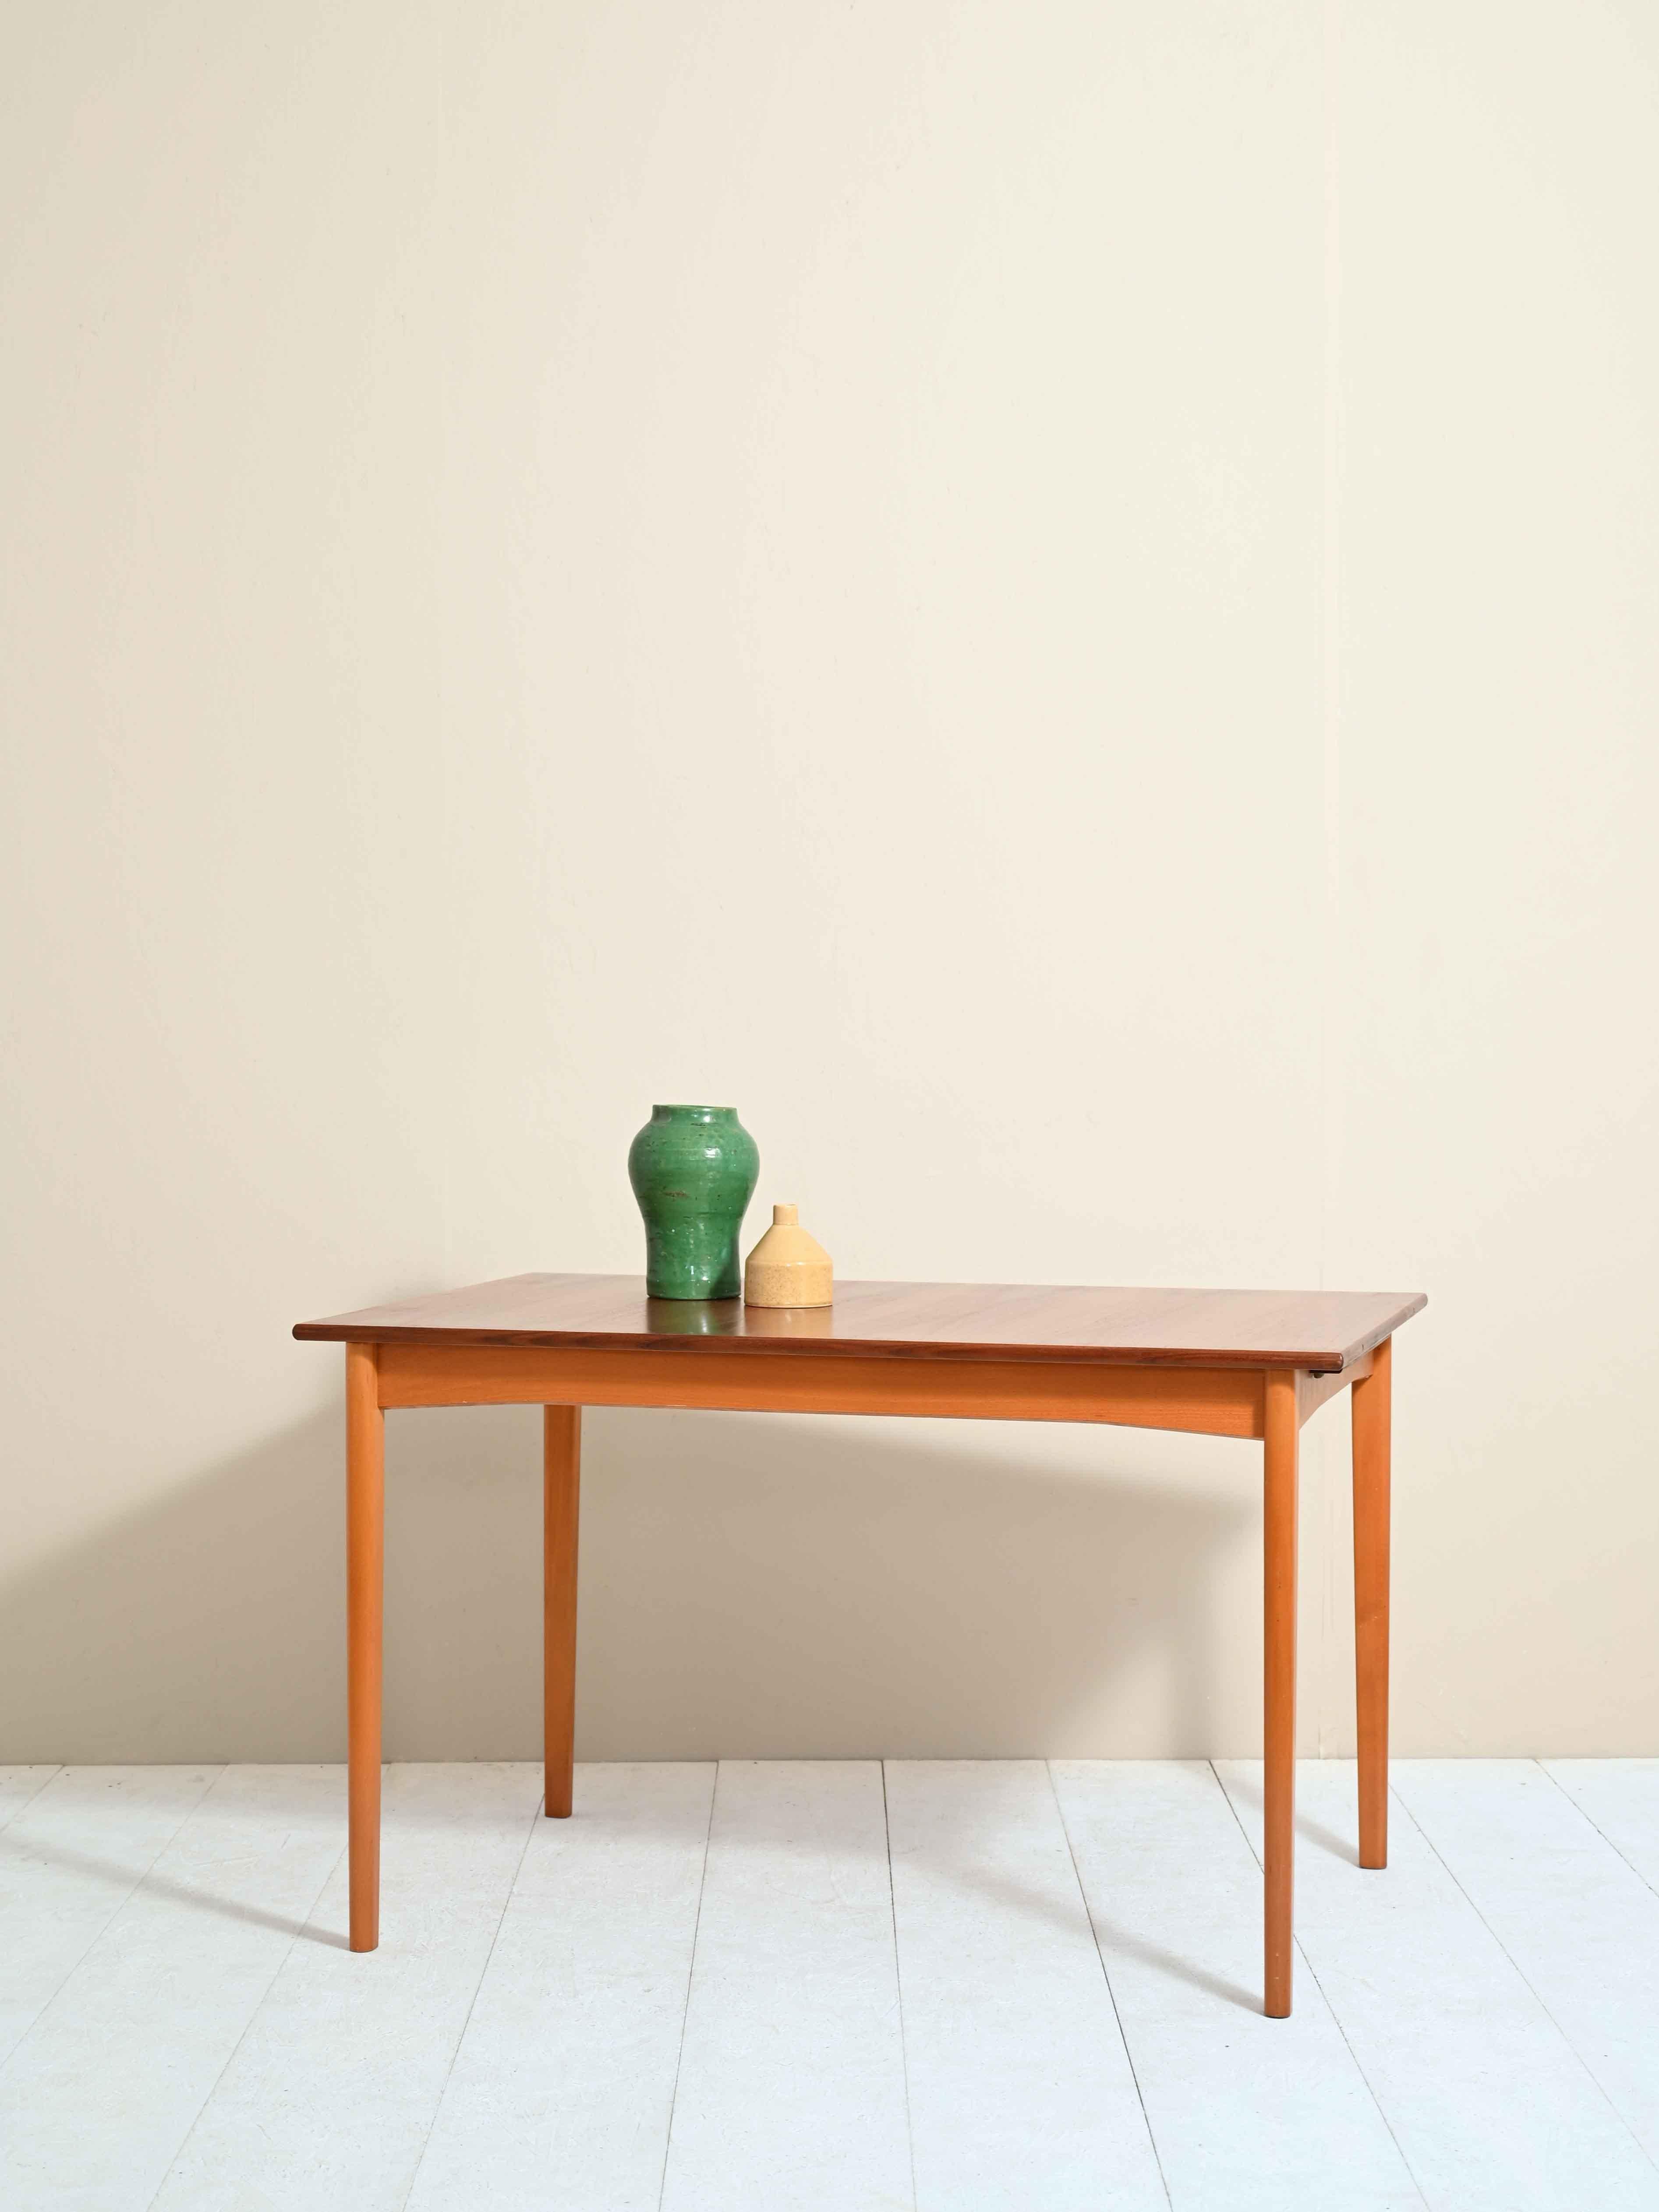 Rectangular dining table, original 1960s.
 
Characterized by simple, minimalist shapes, it can be extended by 47 cm thanks to a removable wing to be used as a tabletop or as an additional seat.
 
Long conical legs, typical of Nordic design, are